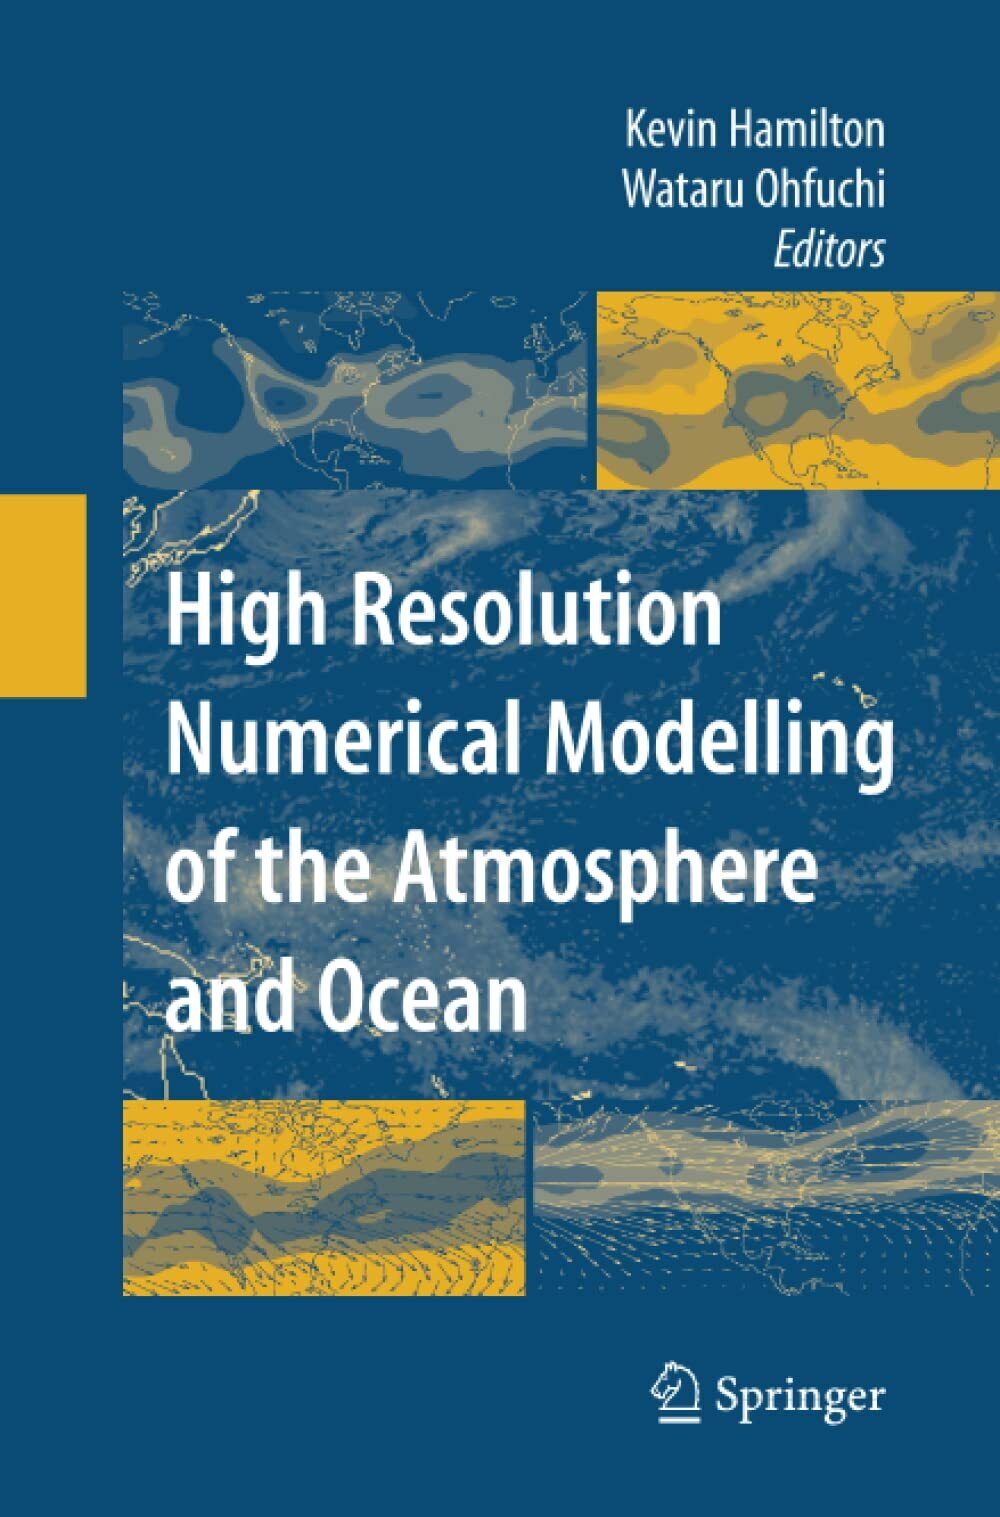 High Resolution Numerical Modelling of the Atmosphere and Ocean - Springer, 2014